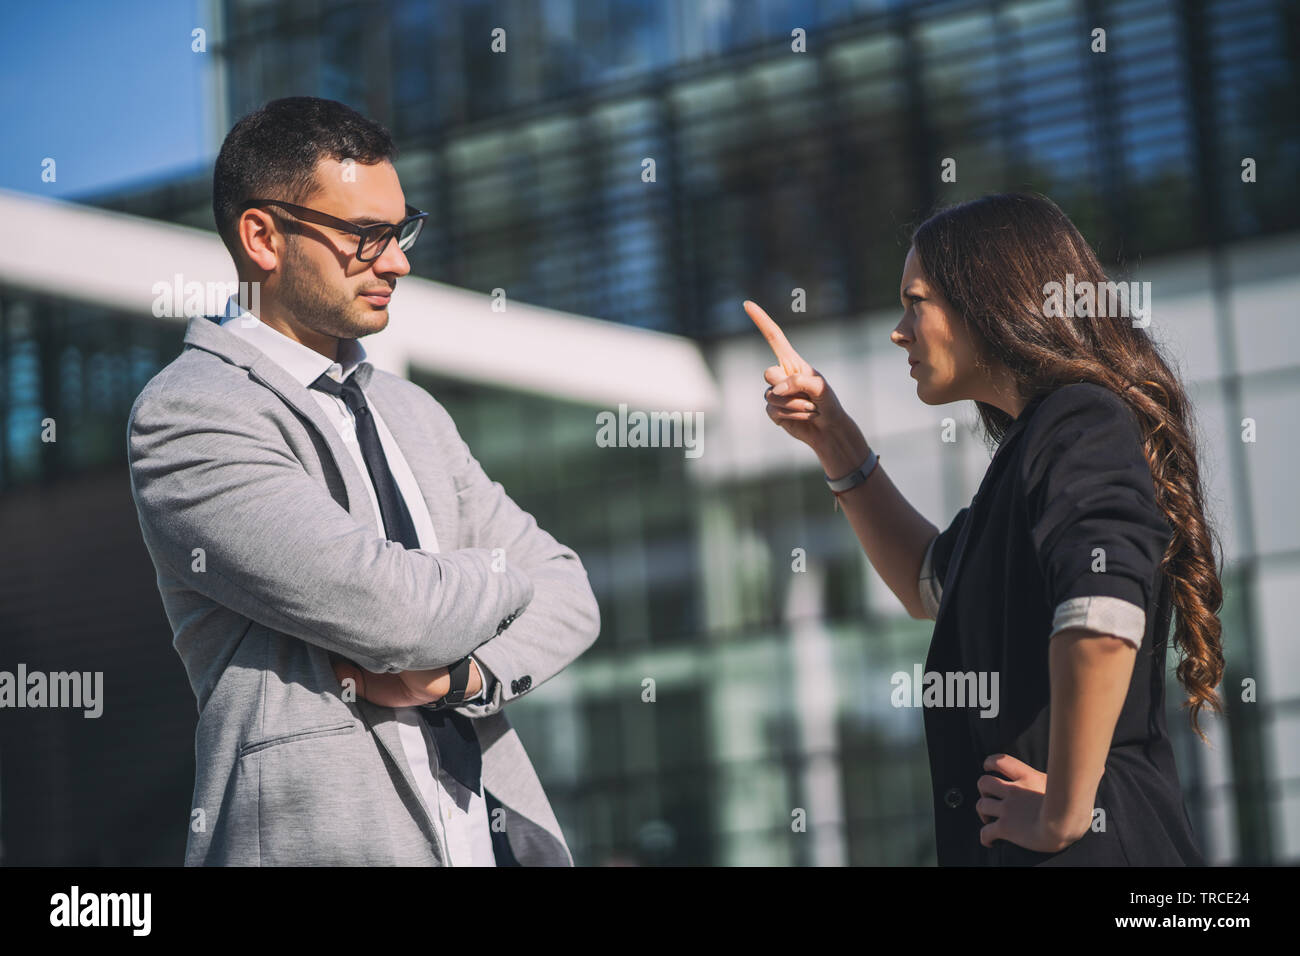 Business colleagues are arguing outside the company building. Stock Photo